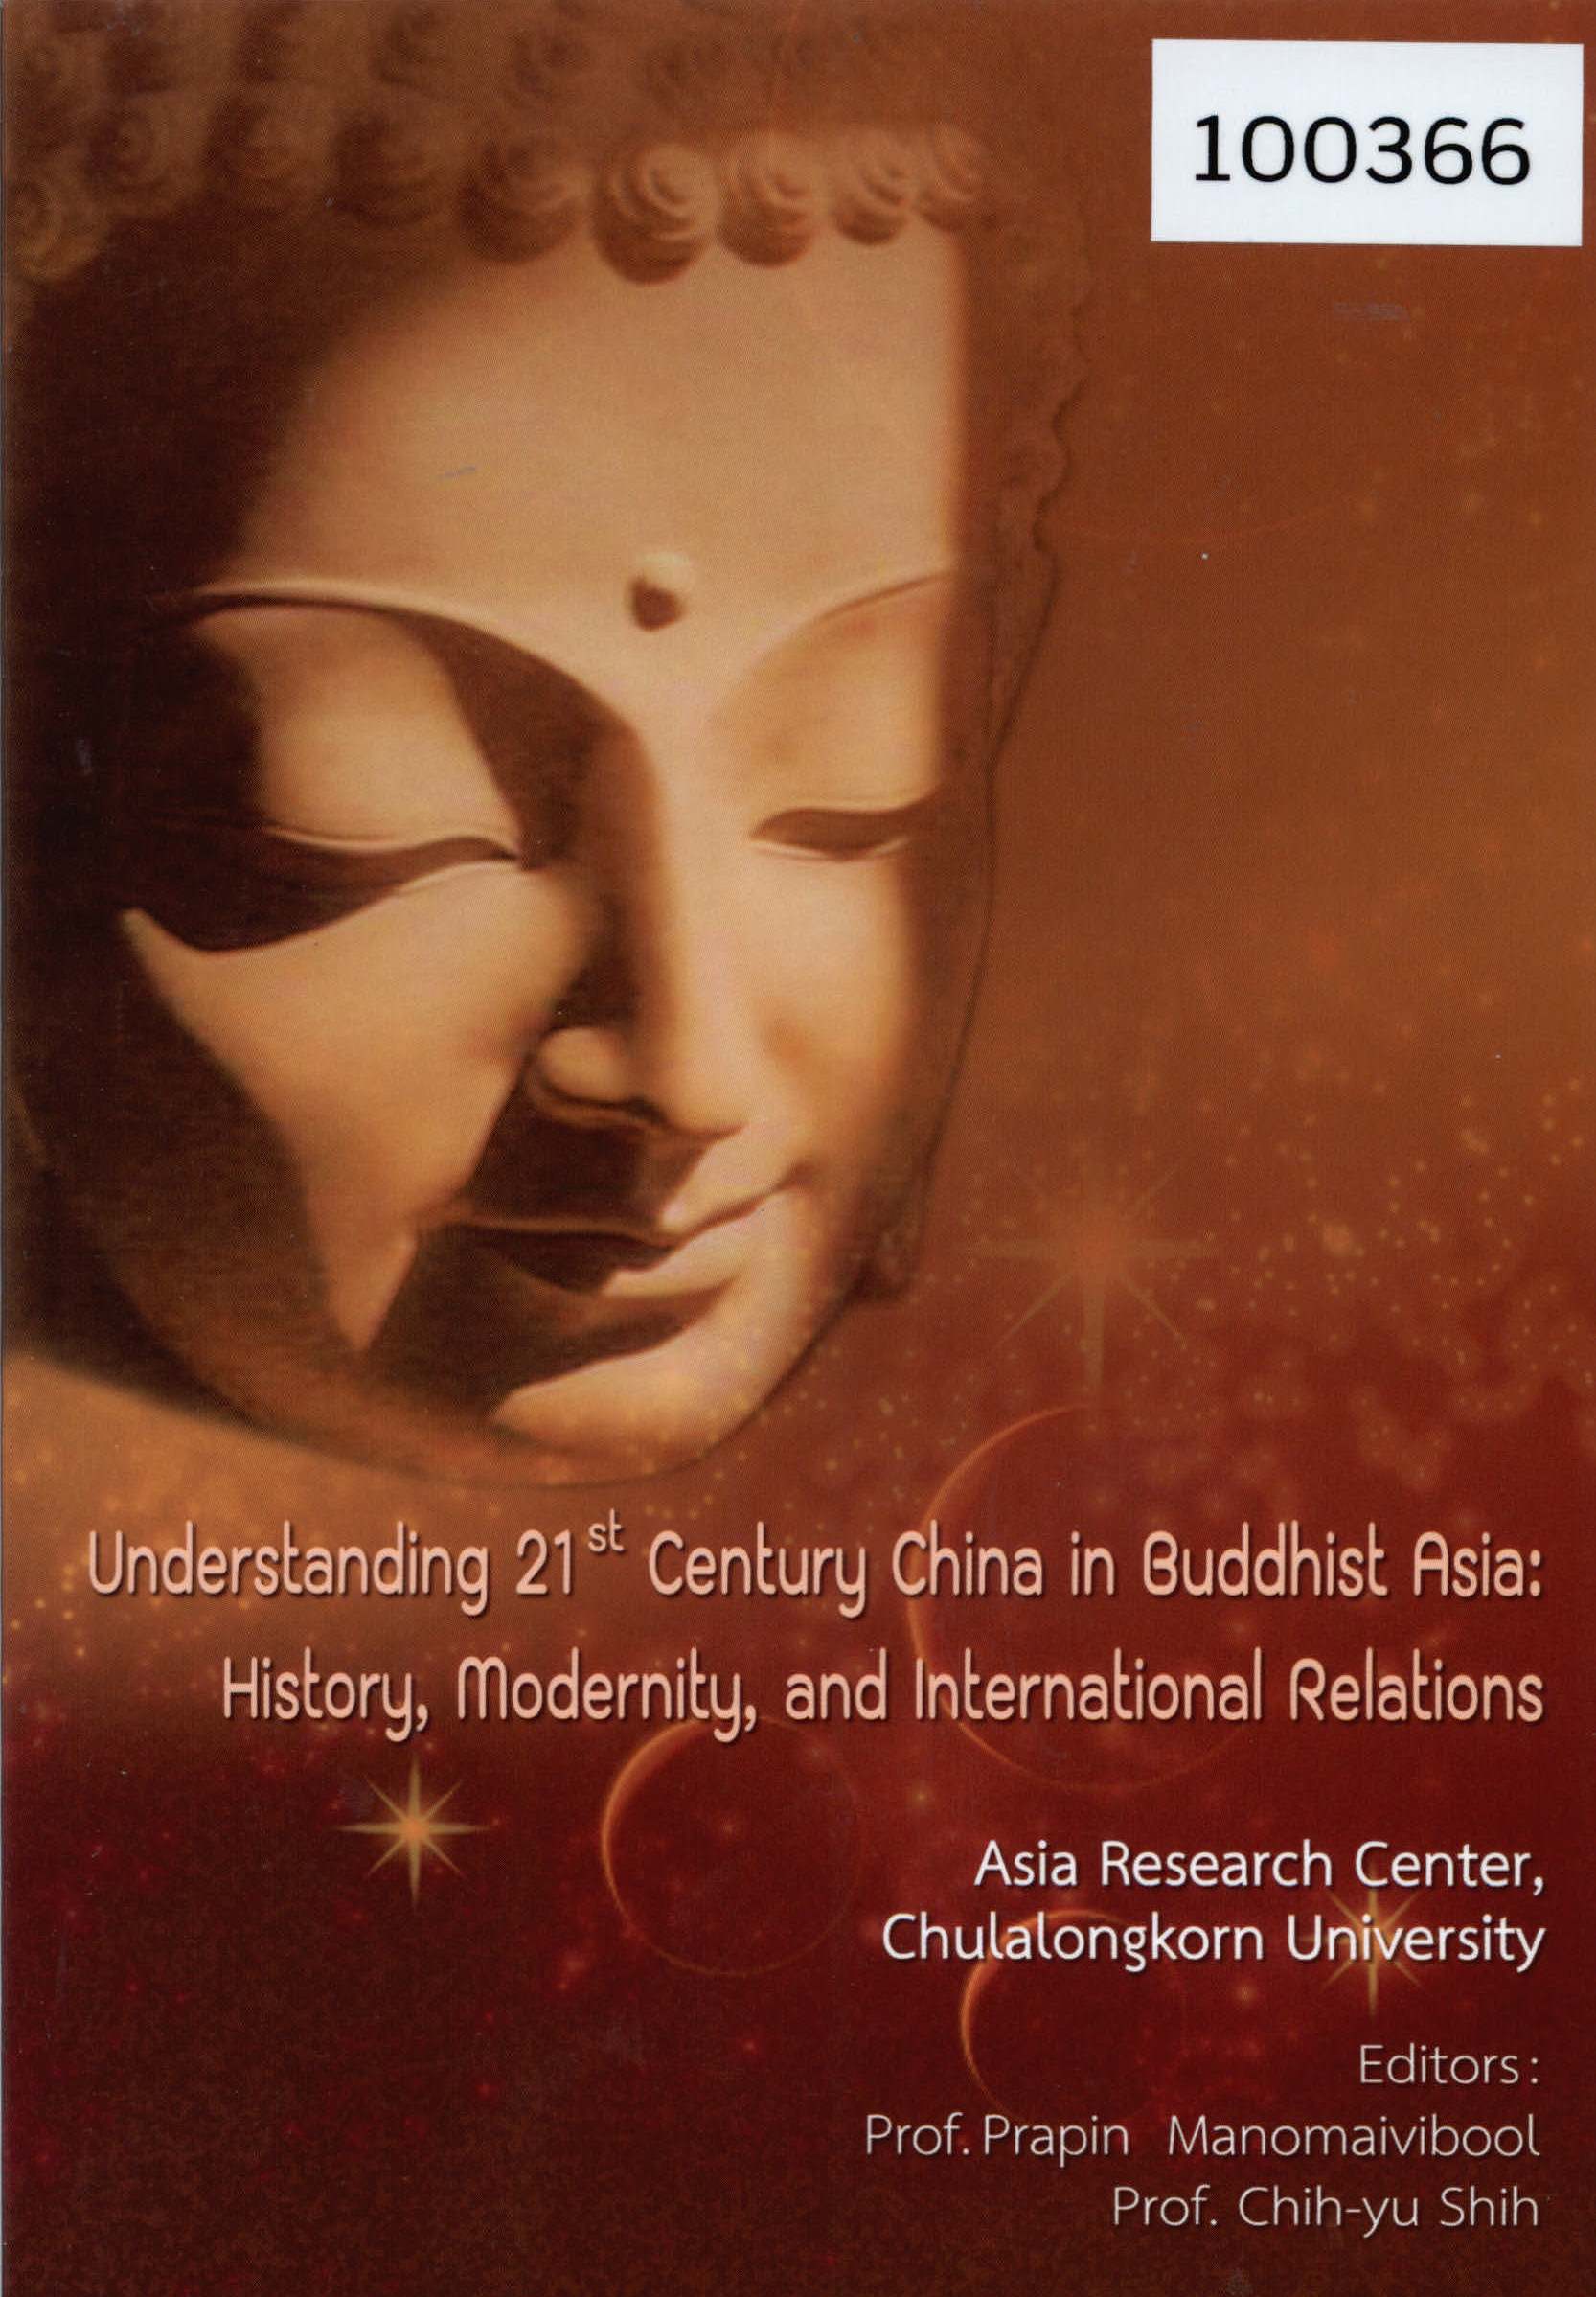 Understanding 21st Century China in Buddhist Asia: History, Modernity, and International Relations